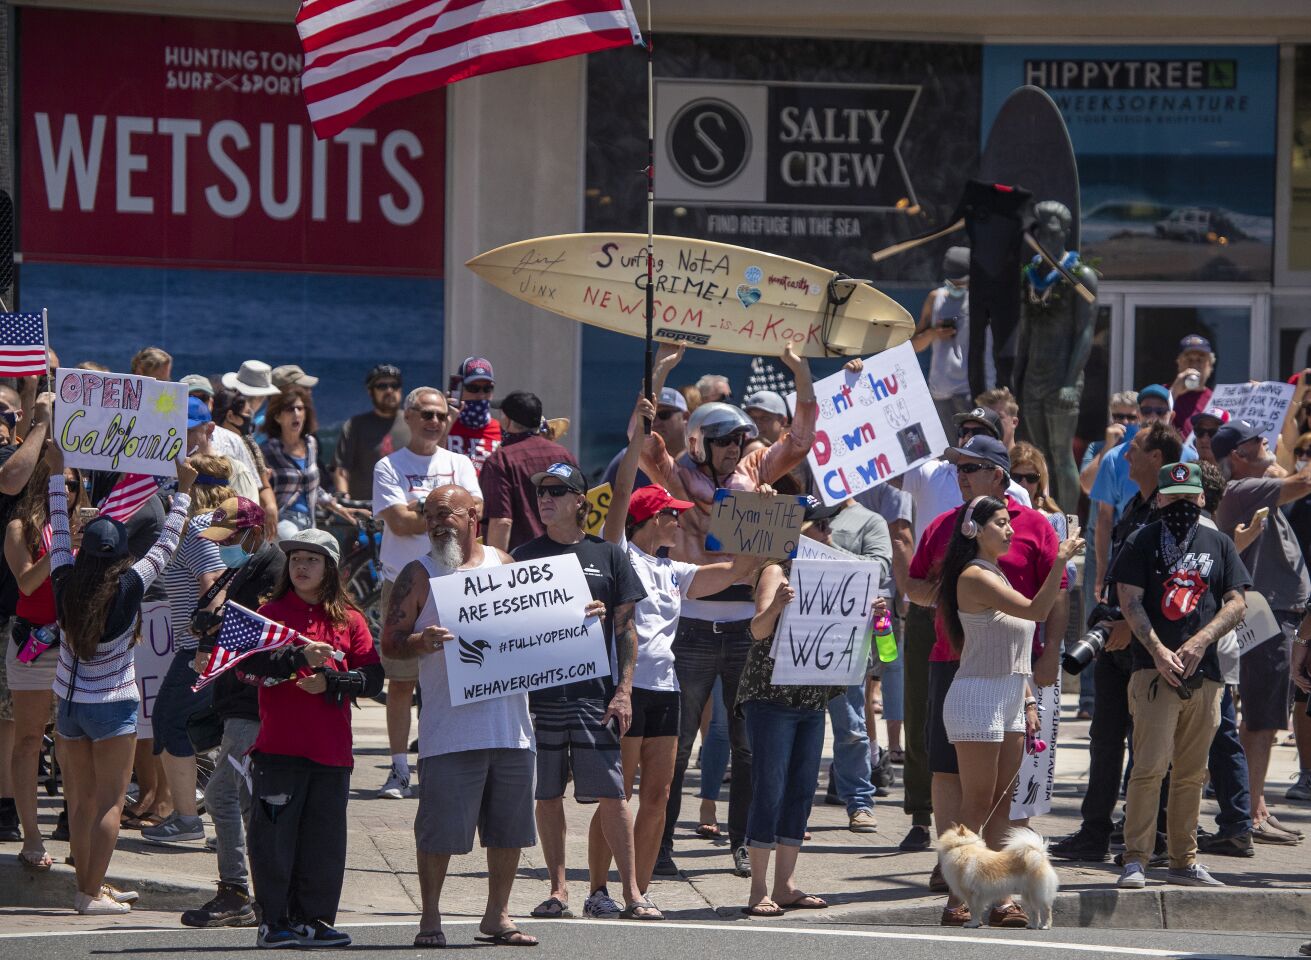 Protesters in Huntington Beach